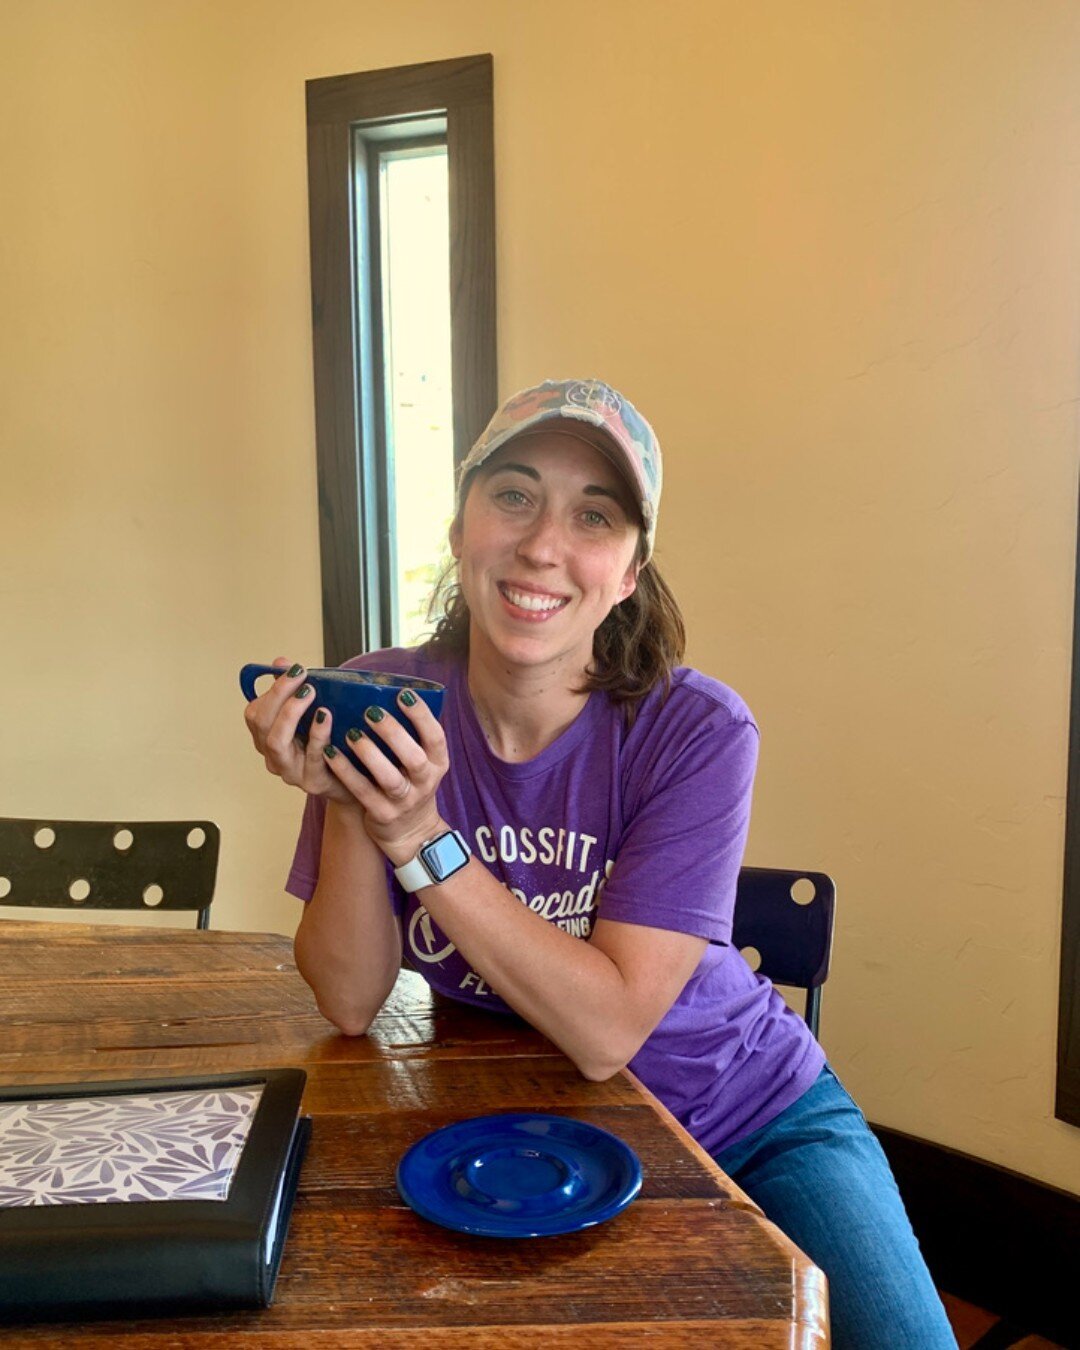 Meet the Regular of the Week: Aubrey!  Aubrey is one of the hardest working people we have ever met.  She is the founder and Executive Director of Blue Haven Ranch here in Argyle, TX. Their mission is to support single pregnant mothers with children.